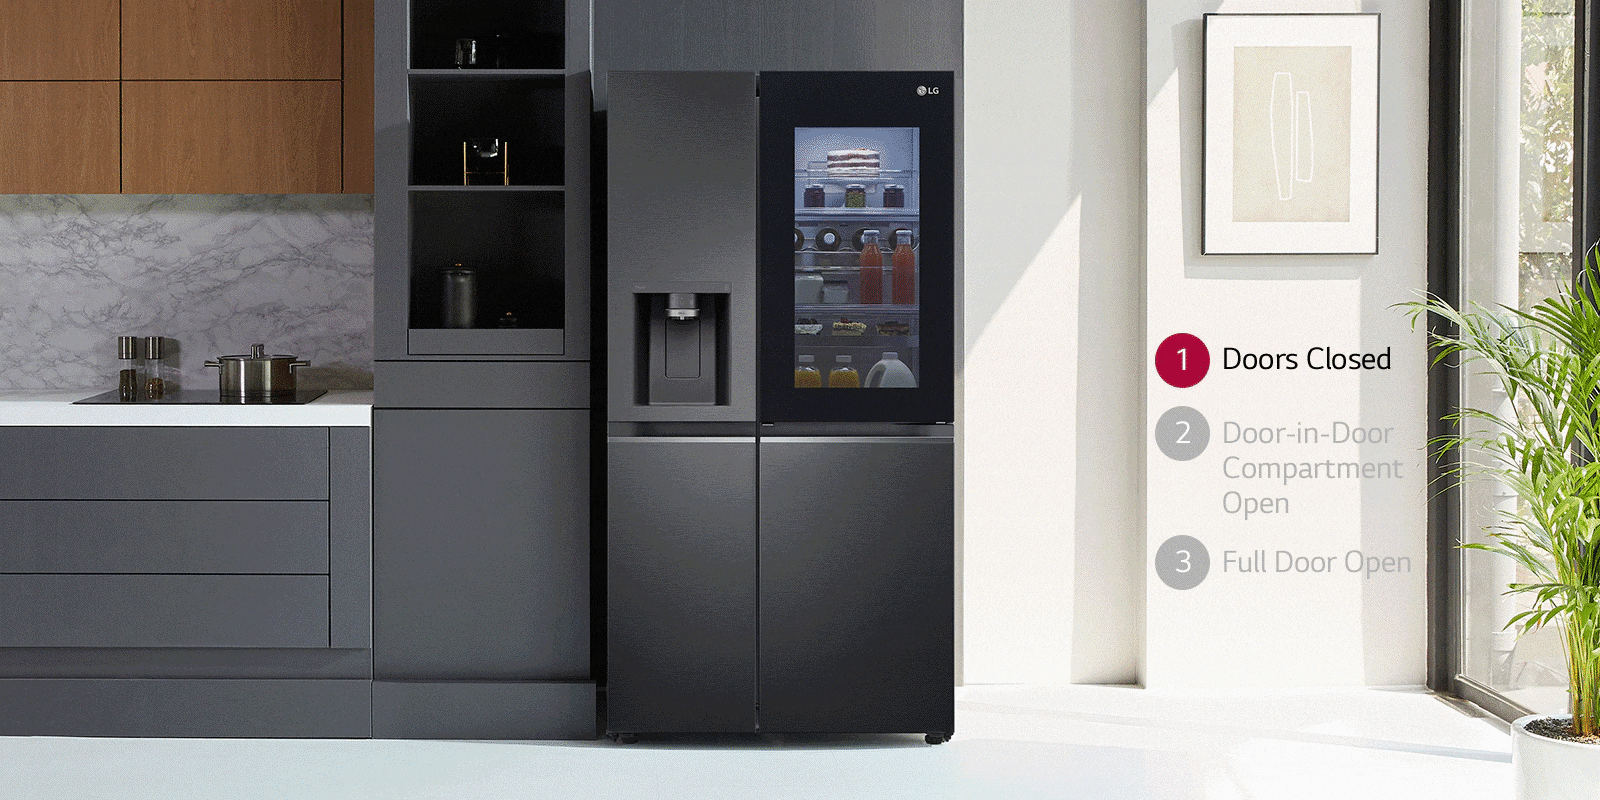 Raid the fridge without losing your cool